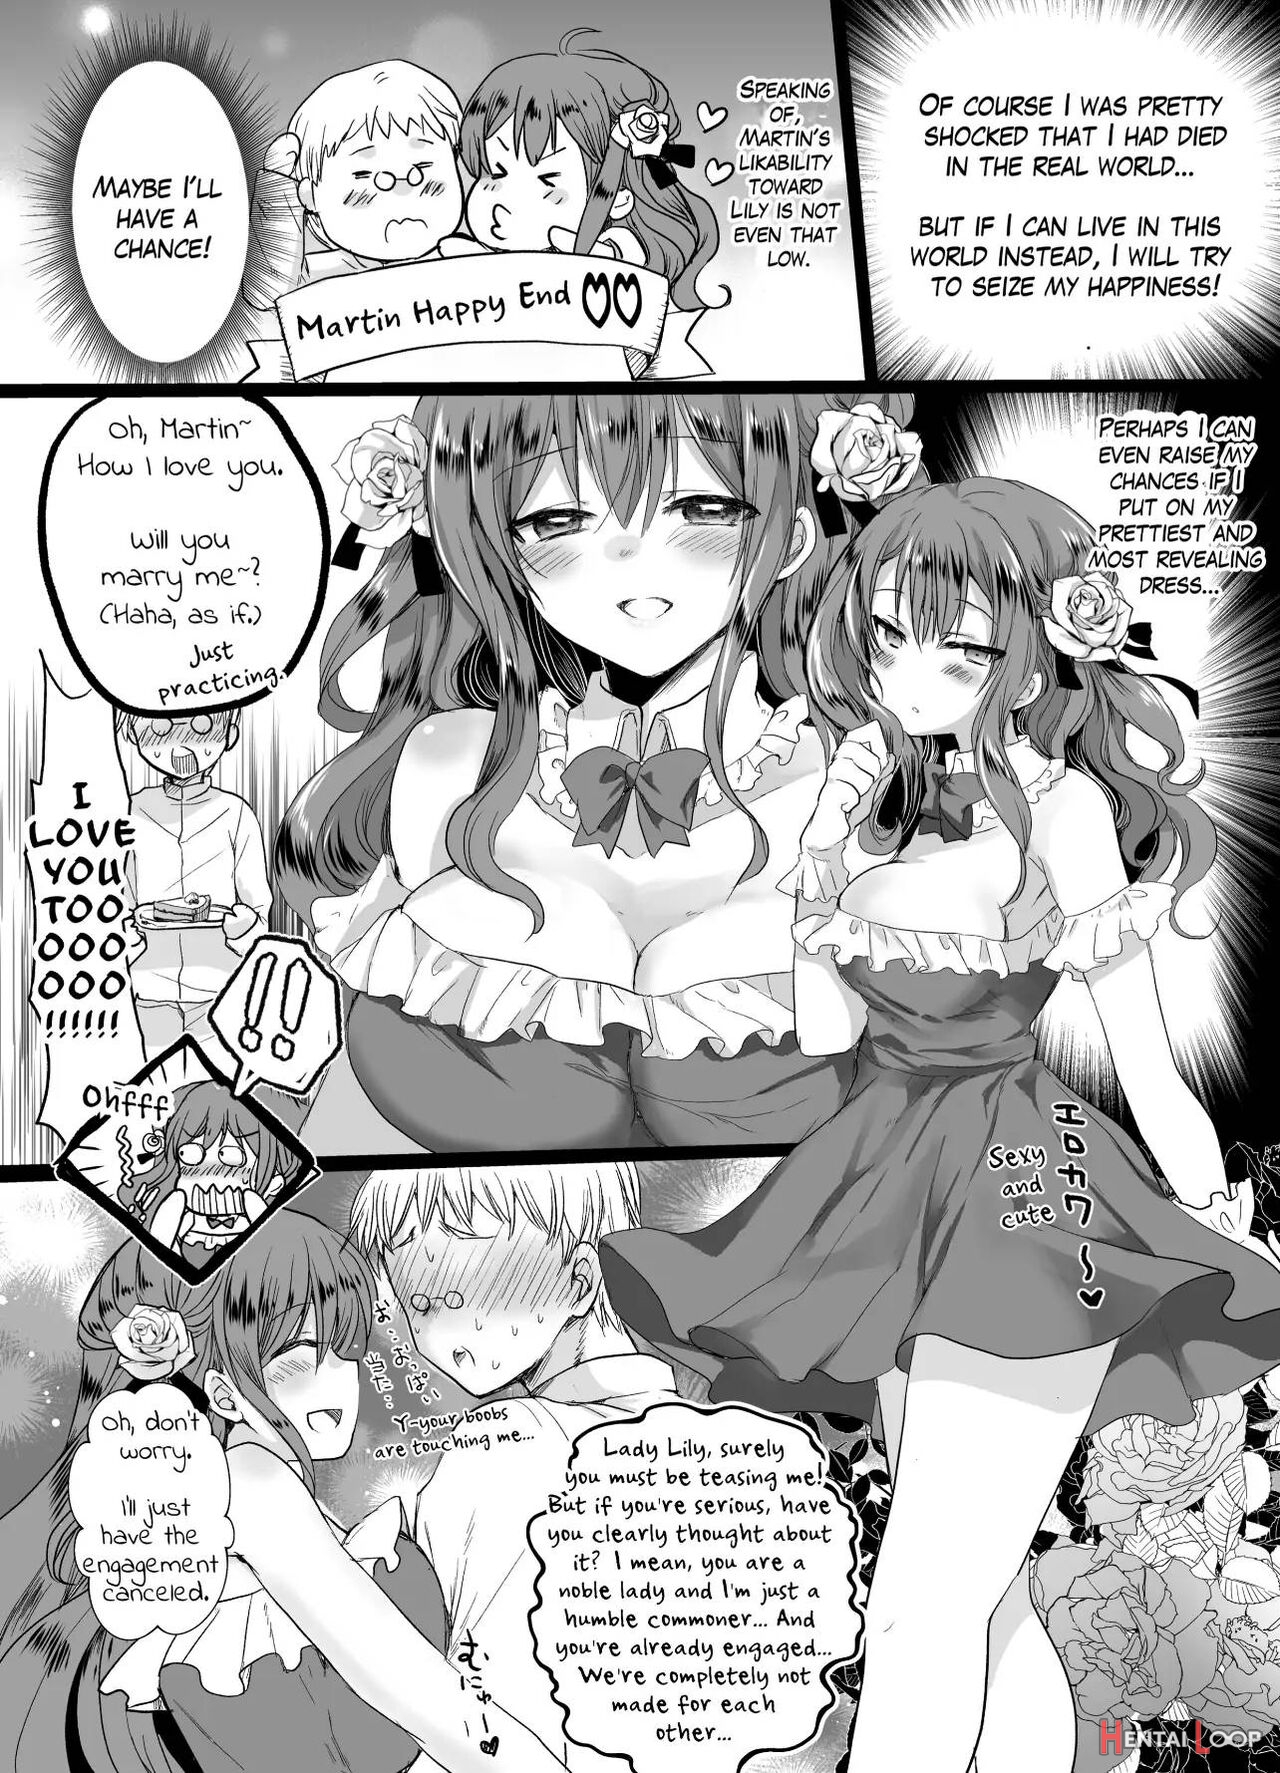  jk's Tragic Isekai Reincarnation As The Villainess ~but My Precious Side Character!~ page 8